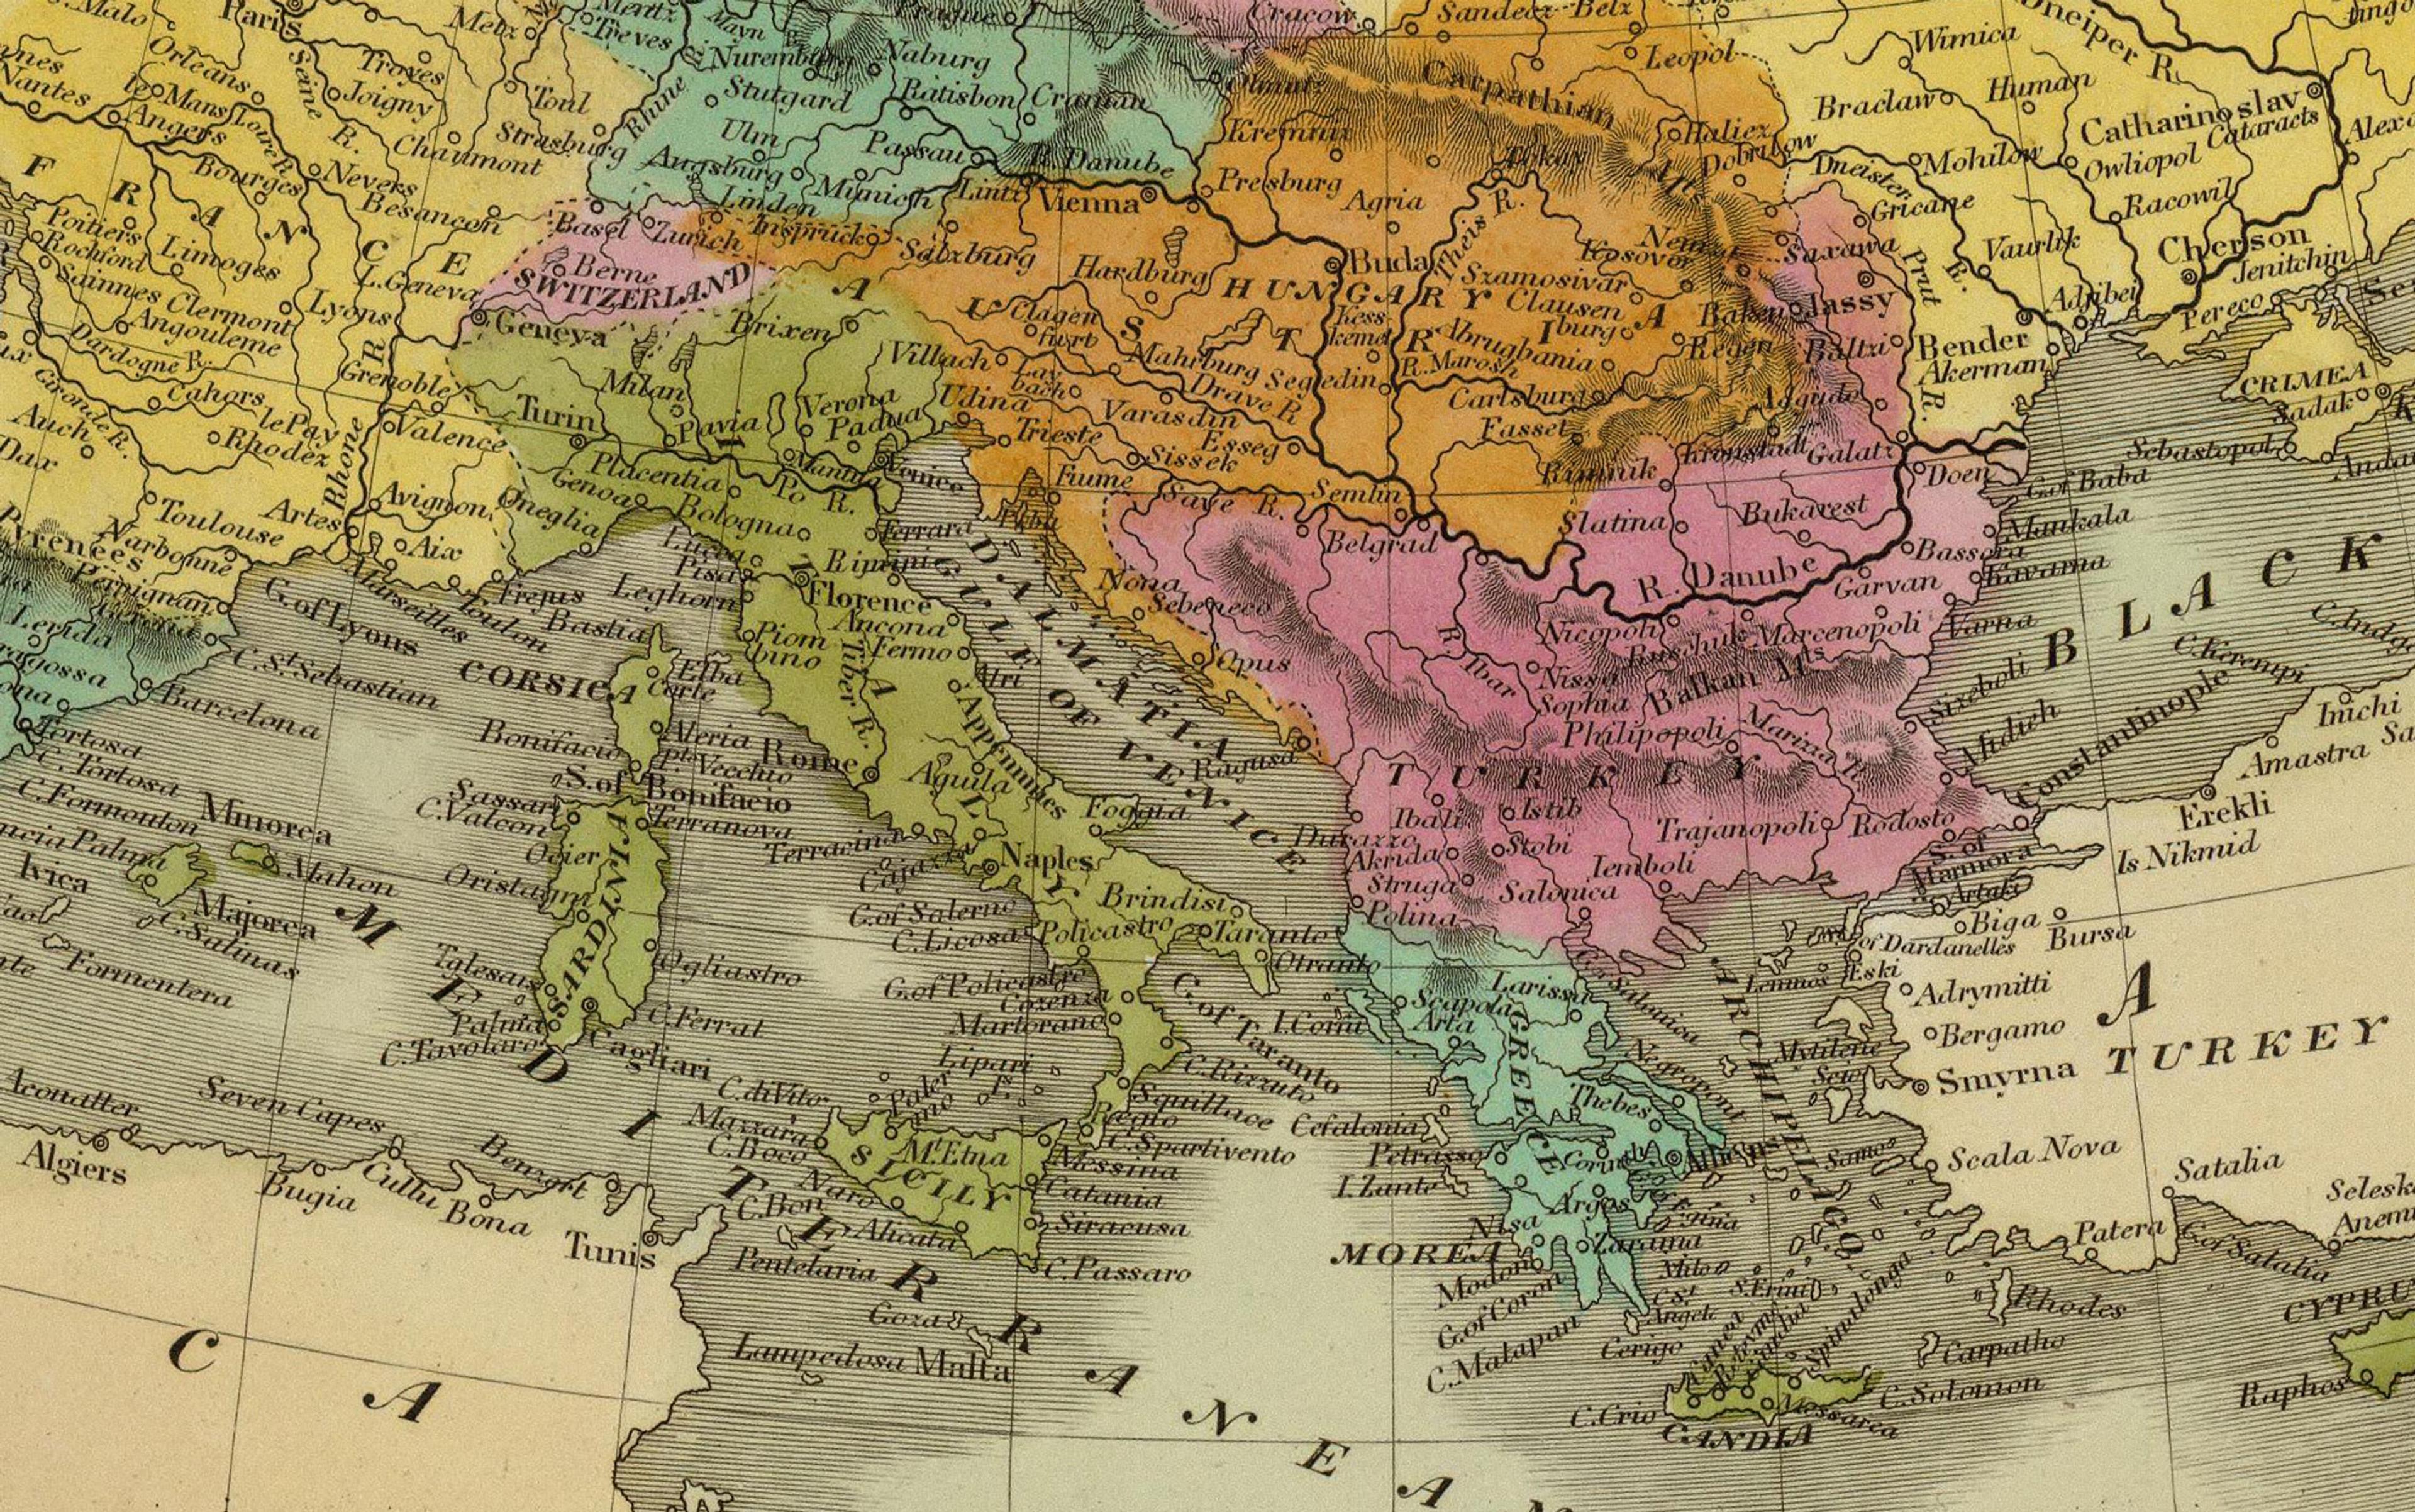 A historical map of Southern Europe, including parts of Austria, Hungary, Italy, Turkey, and the Balkans. Features cities such as Milan, Vienna, Rome, and Constantinople, with regions distinguished by different colours. Sea names such as the Adriatic and Mediterranean are also visible.